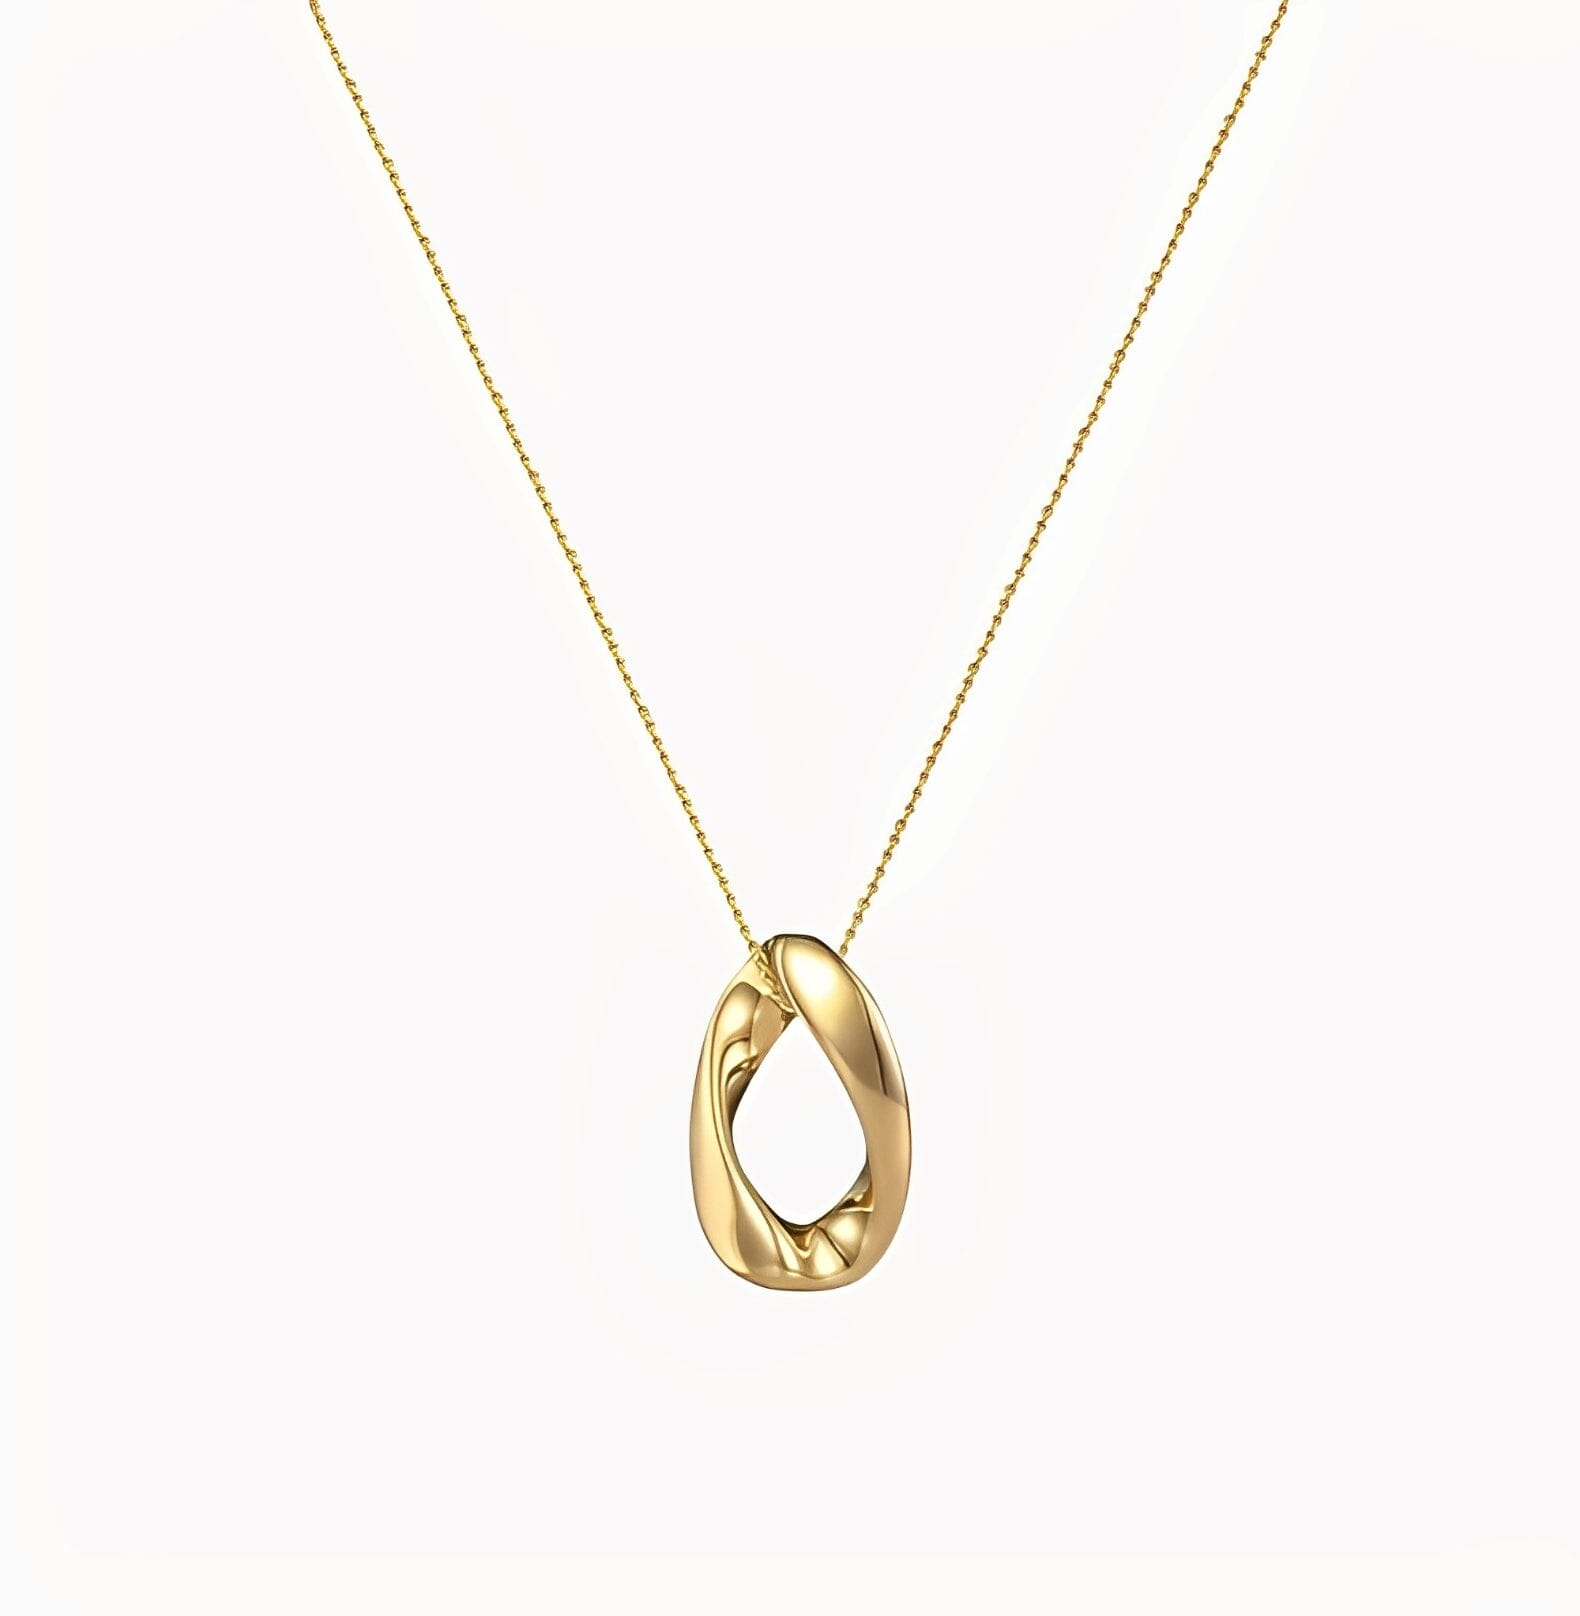 PAYRONI PENDANT NECKLACE braclet Yubama Jewelry Online Store - The Elegant Designs of Gold and Silver ! Gold 